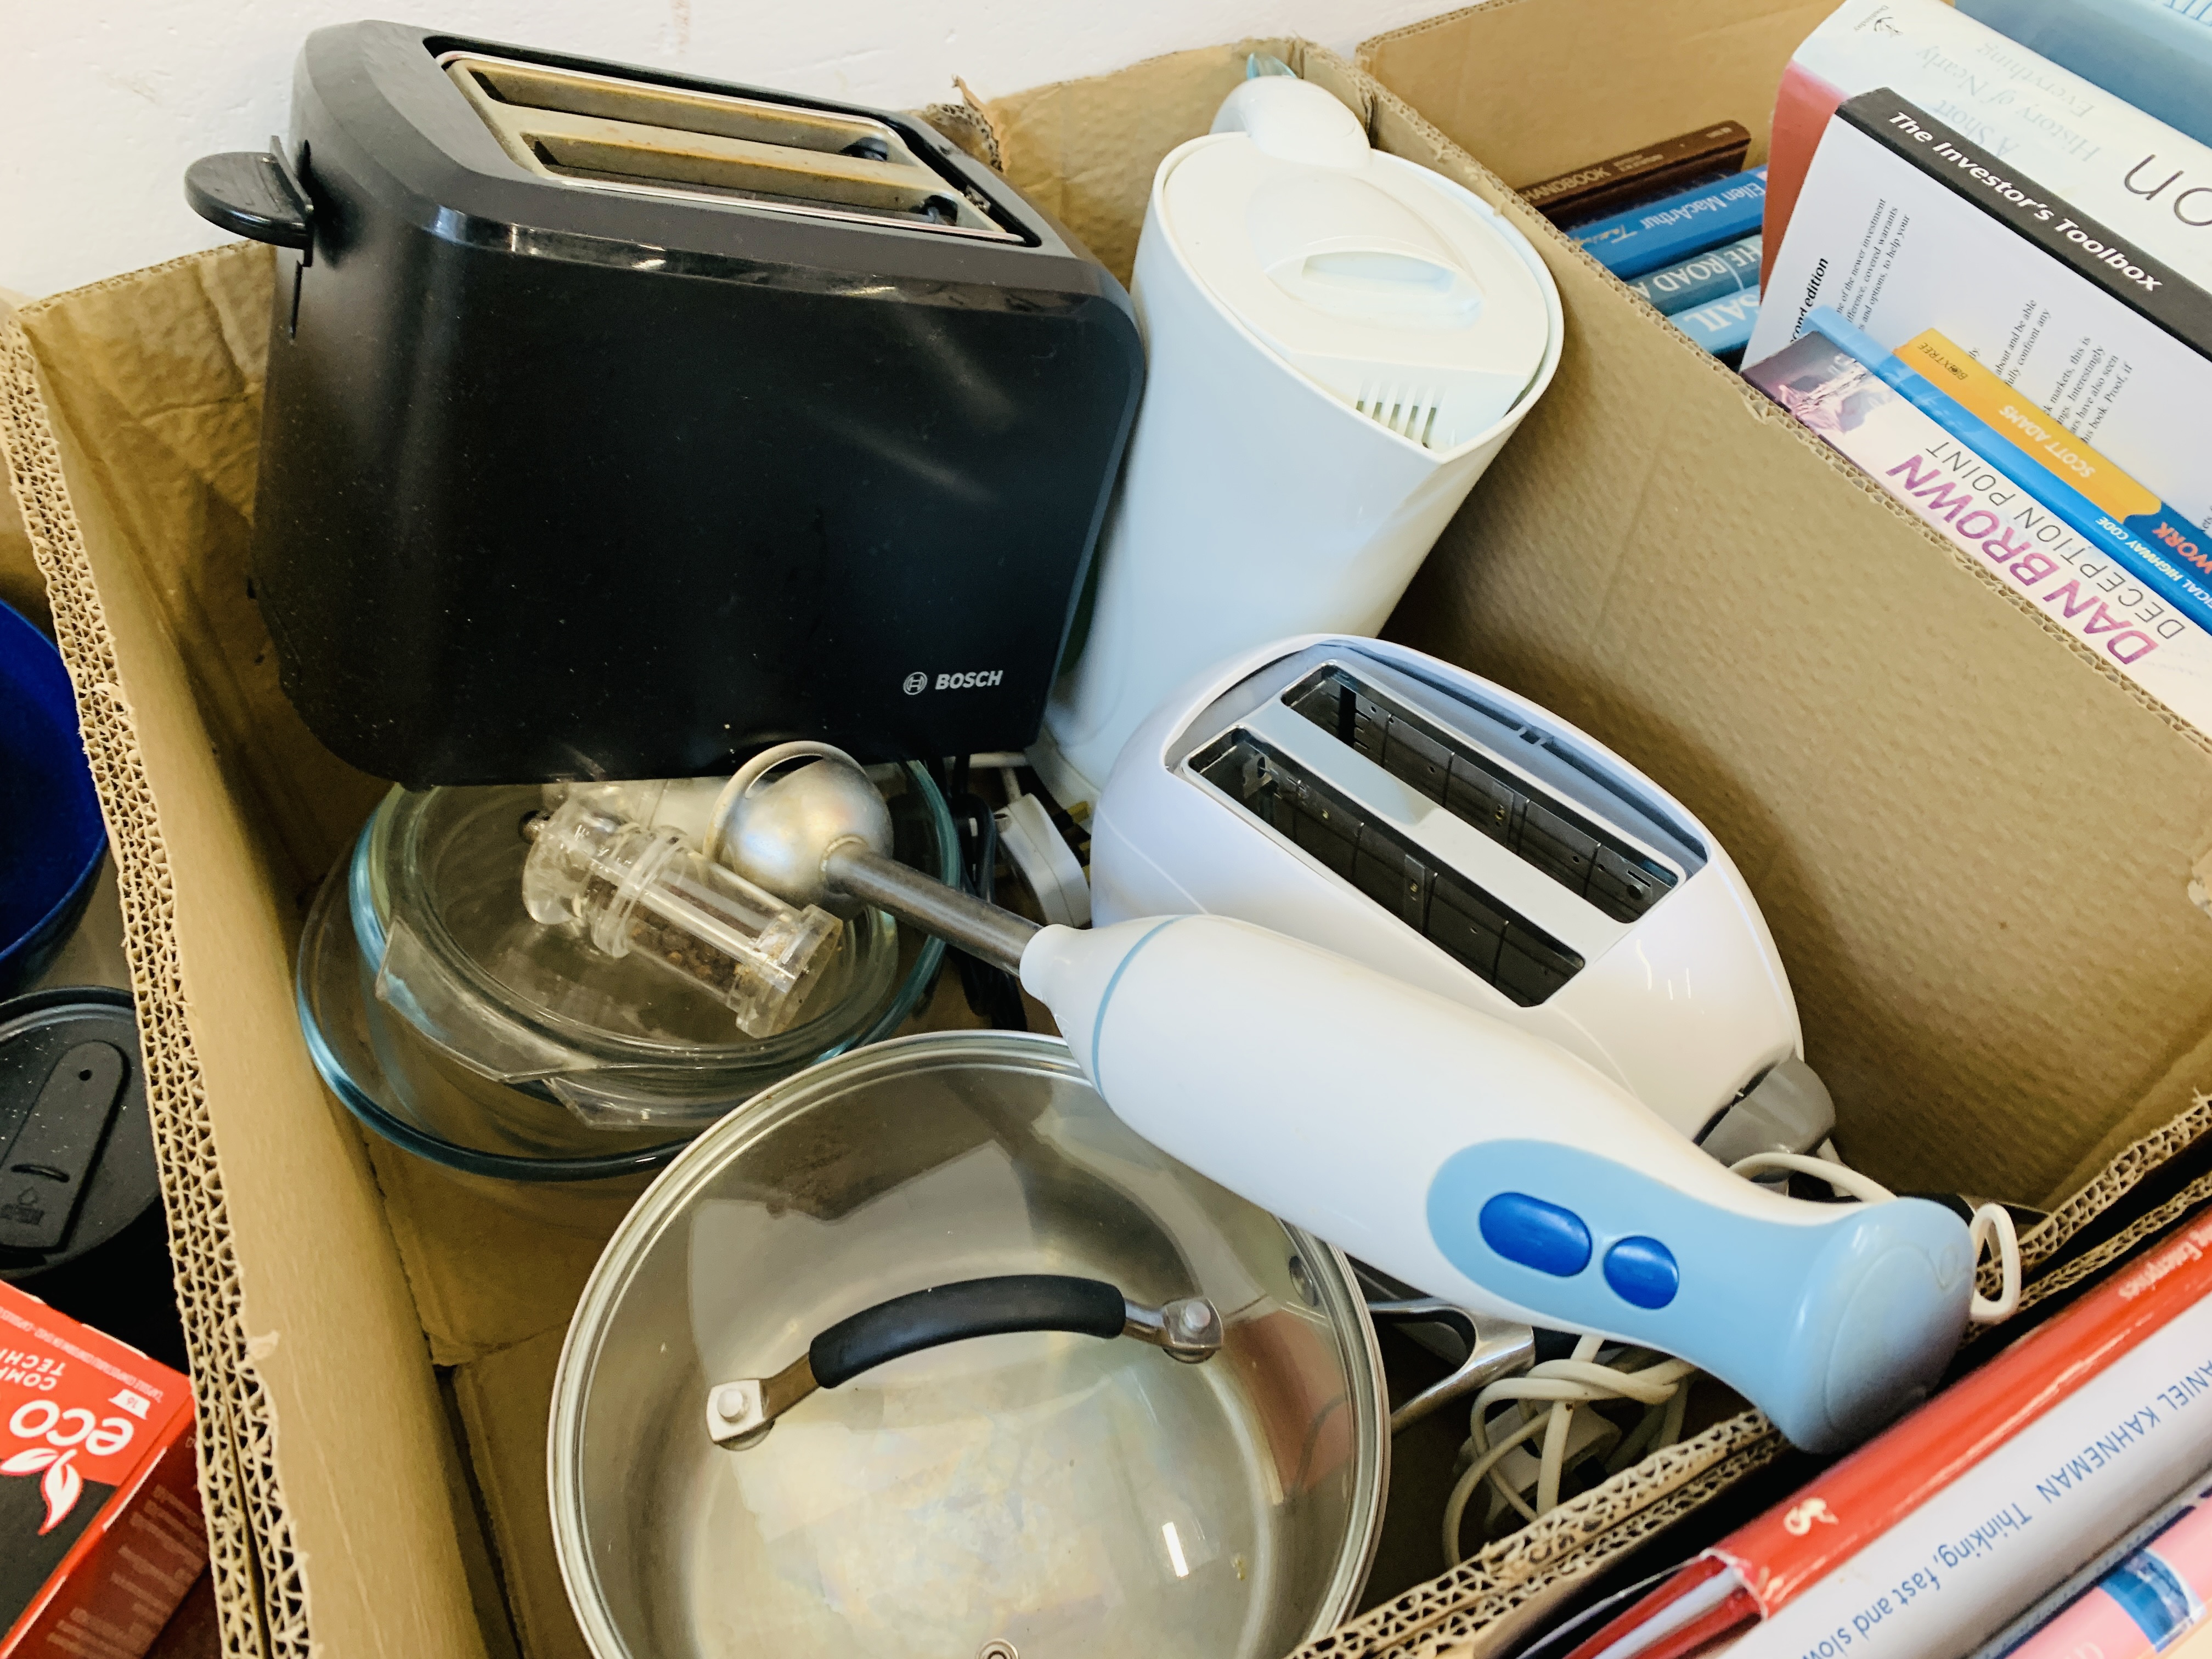 THREE BOXES OF KITCHEN WARES TO INCLUDE KETTLES, TOASTERS, BLENDER, TABLEWARE, SCALES, - Image 5 of 8